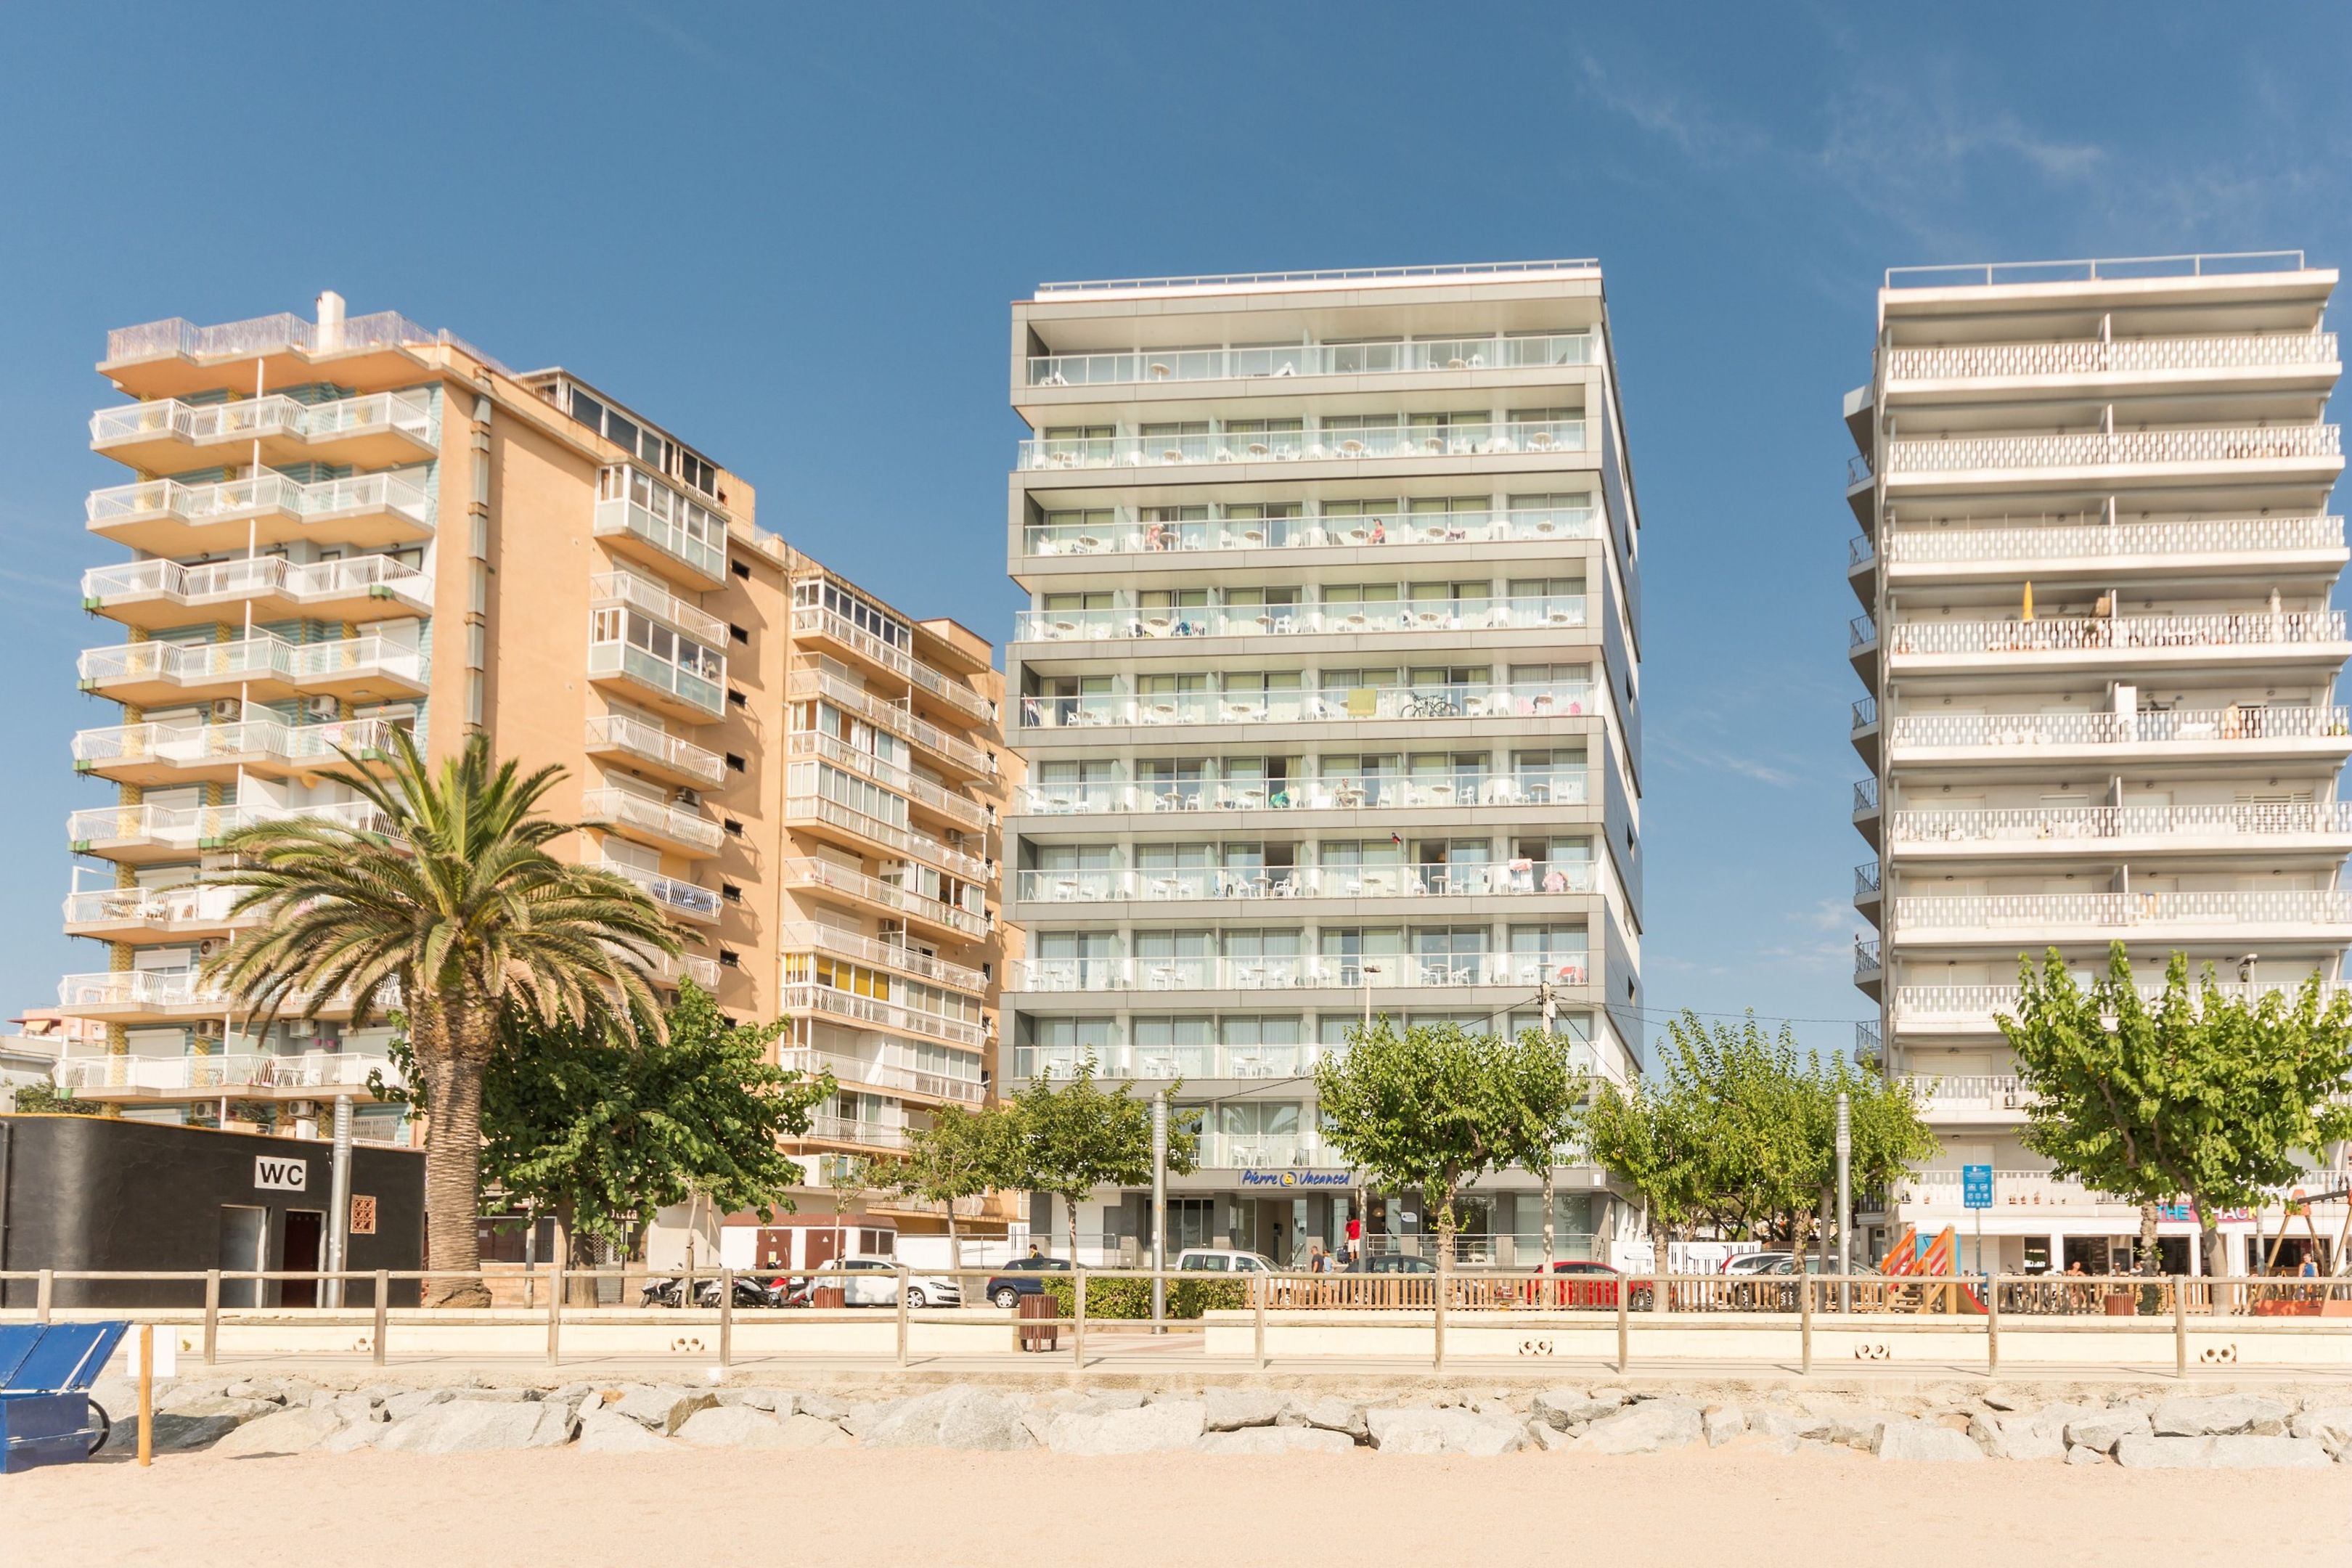 Pierre and Vacances Residence Blanes Playa 